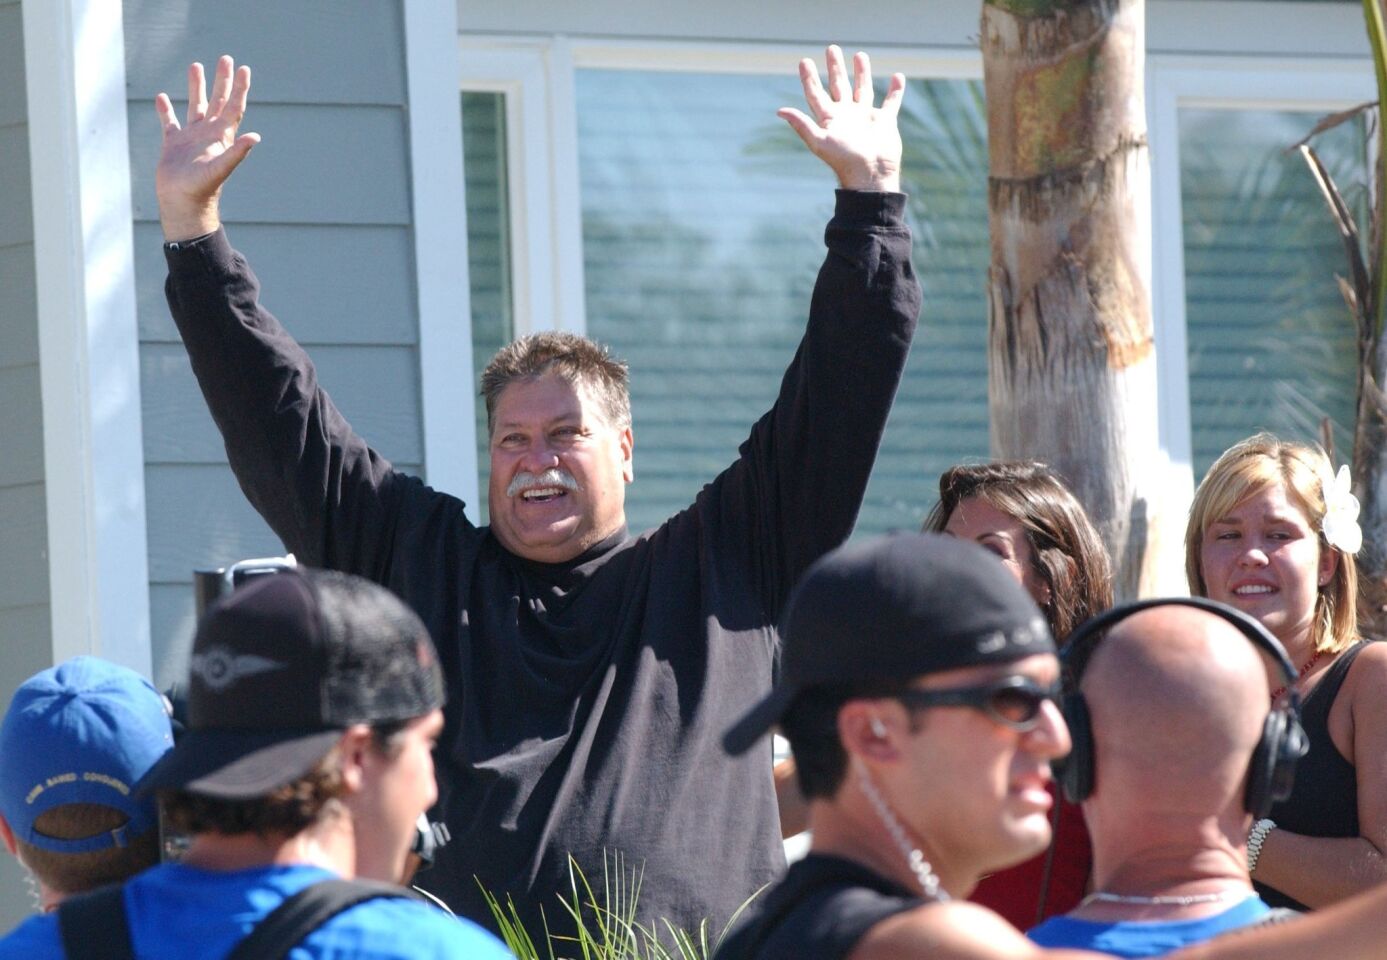 Brian Wofford waves to a large crowd gathered outside his home shortly after seeing his remade home for the first time on June 30, 2004. The house received a radical makever by the design team from the ABC-TV program "Extreme Makeover: Home Edition."